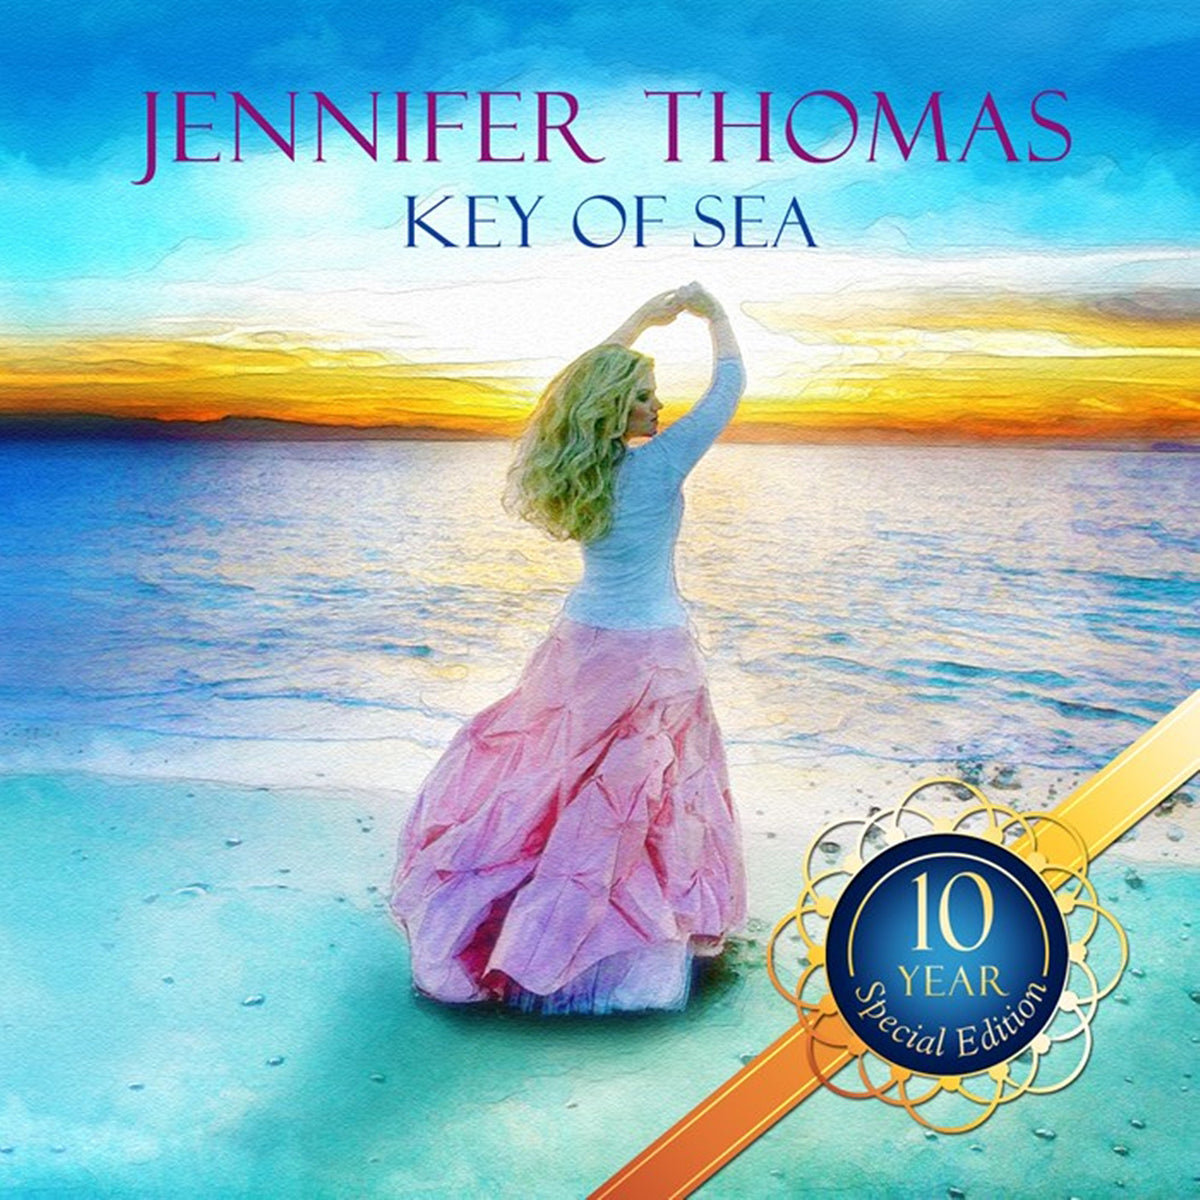 The Key of Sea Collection